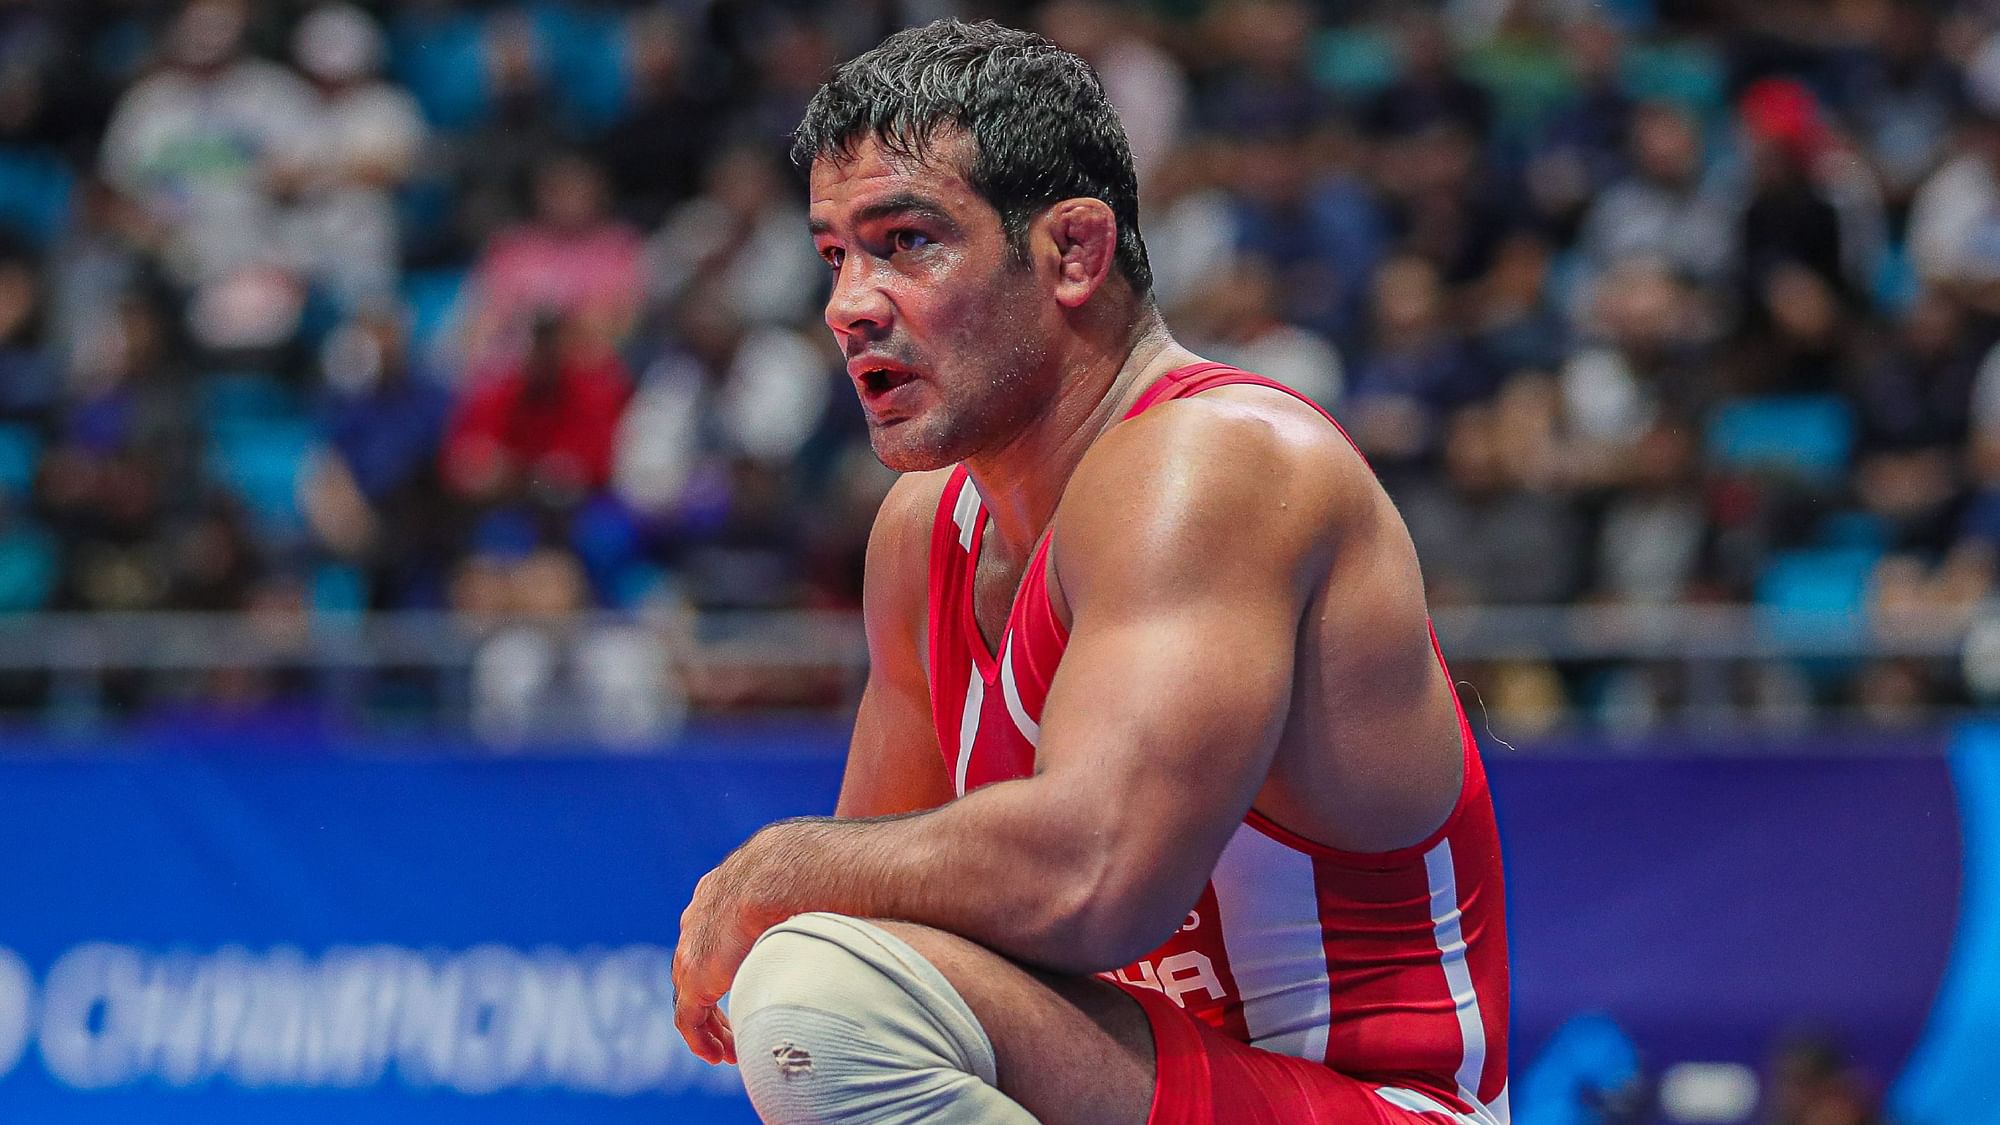 Sushil Kumar has two Olympic medals and one world title to his name.